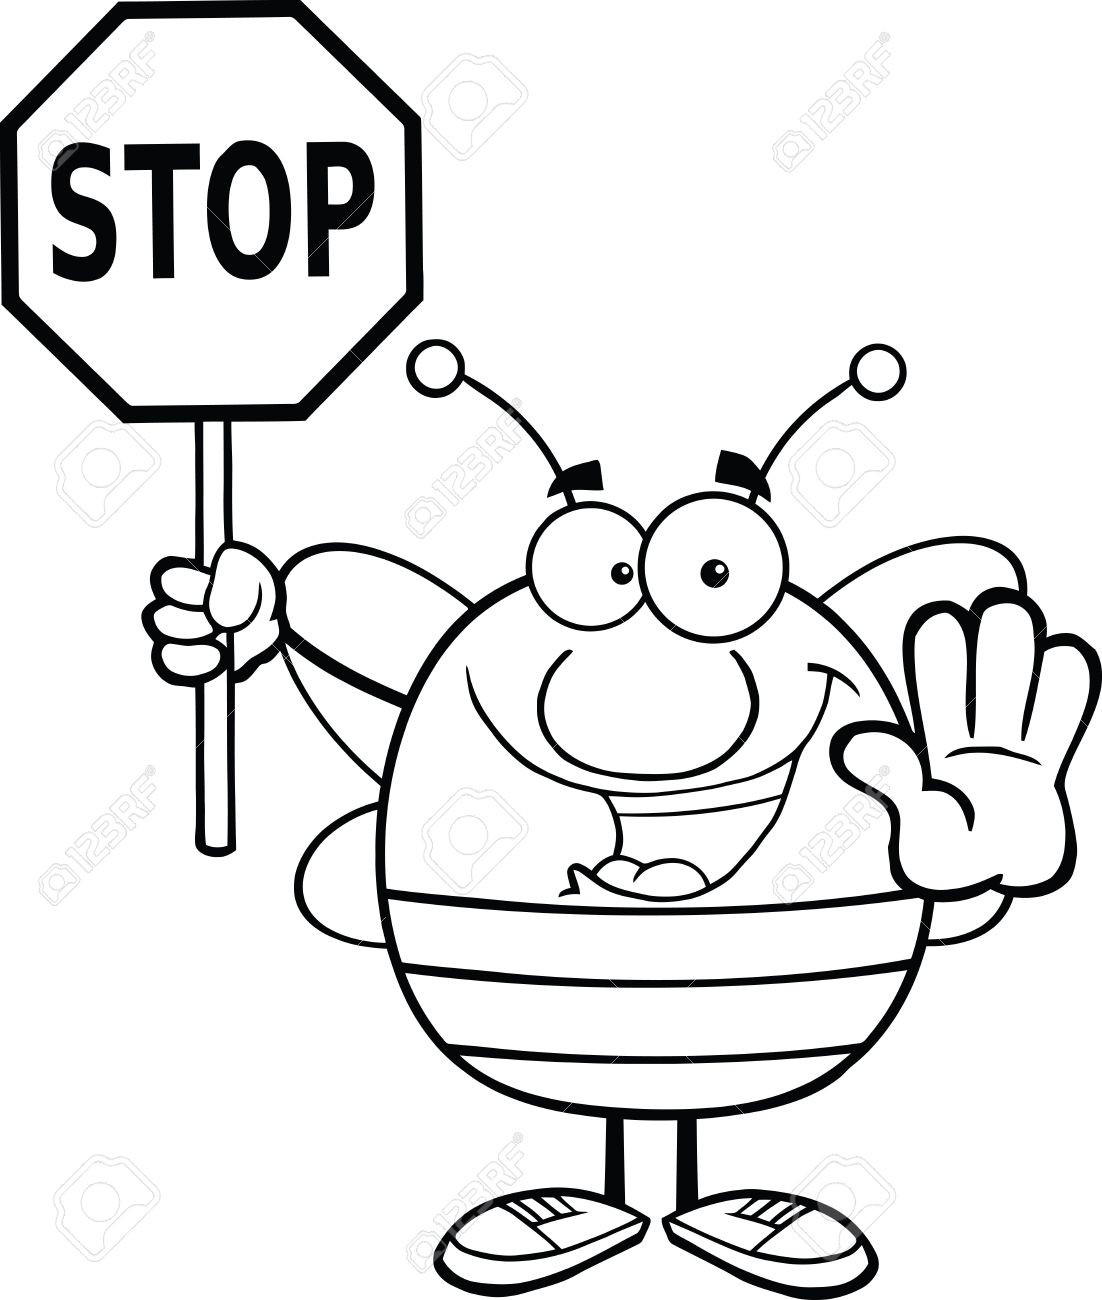 Black And White Pudgy Bee ... - Stop Sign Clip Art Black And White